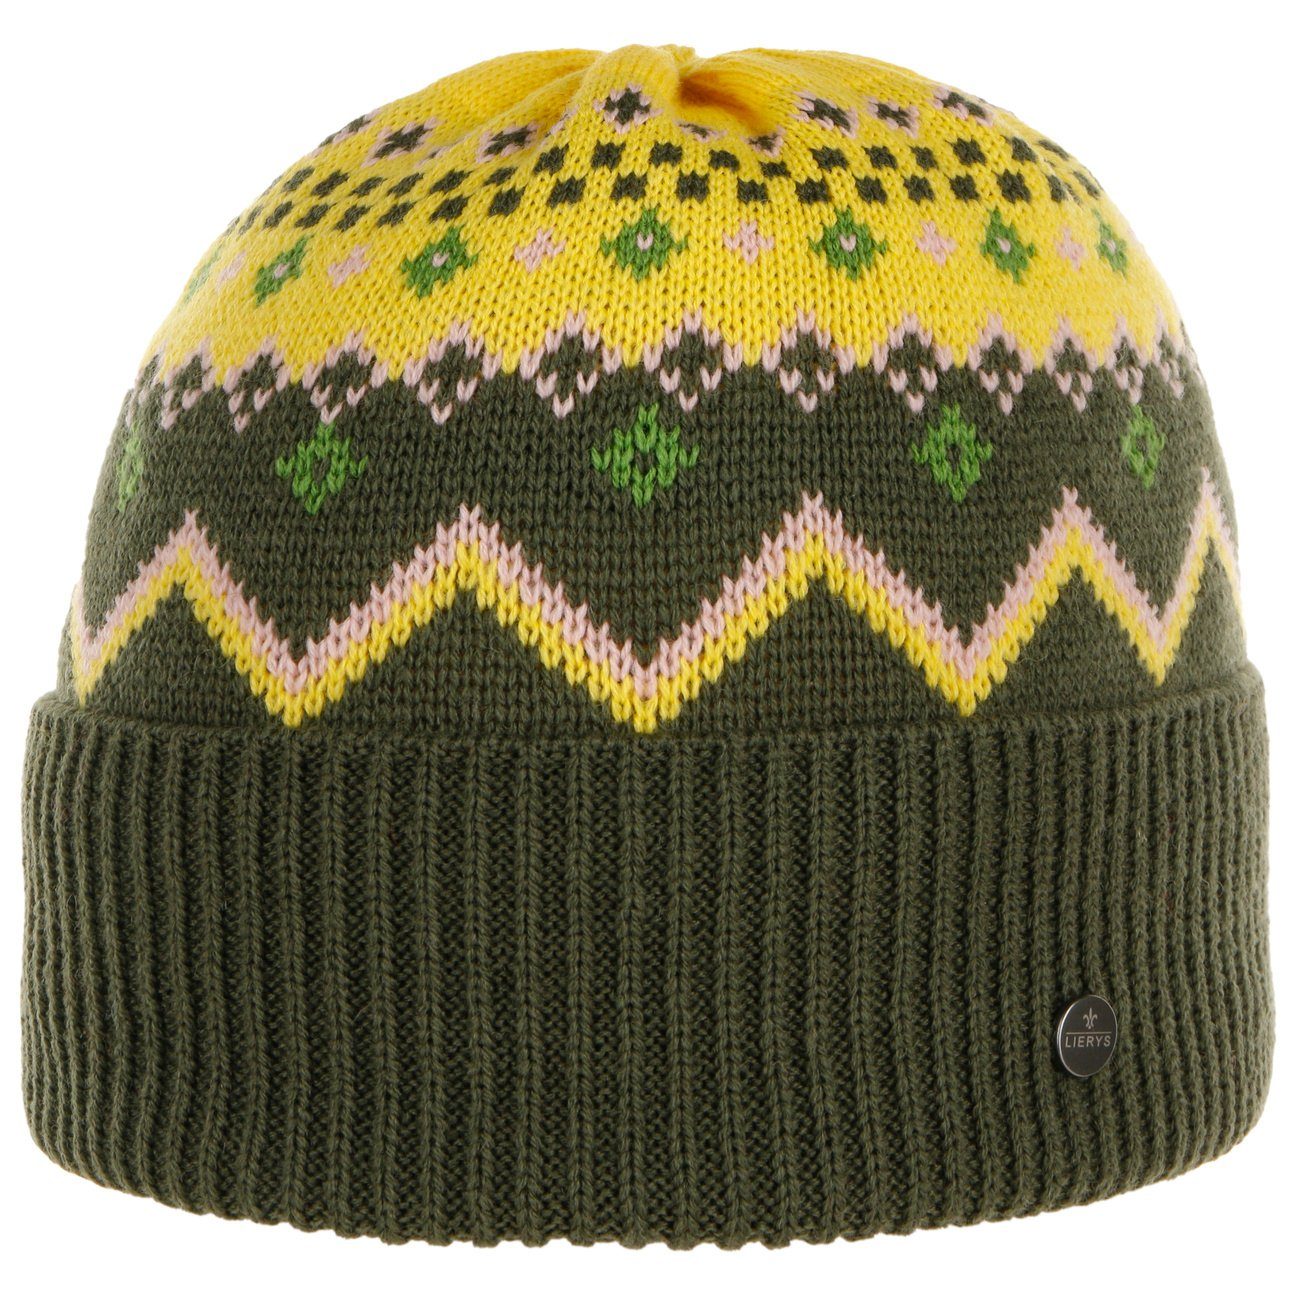 Lierys Beanie (1-St) mit Umschlag, Made in Germany oliv | Beanies